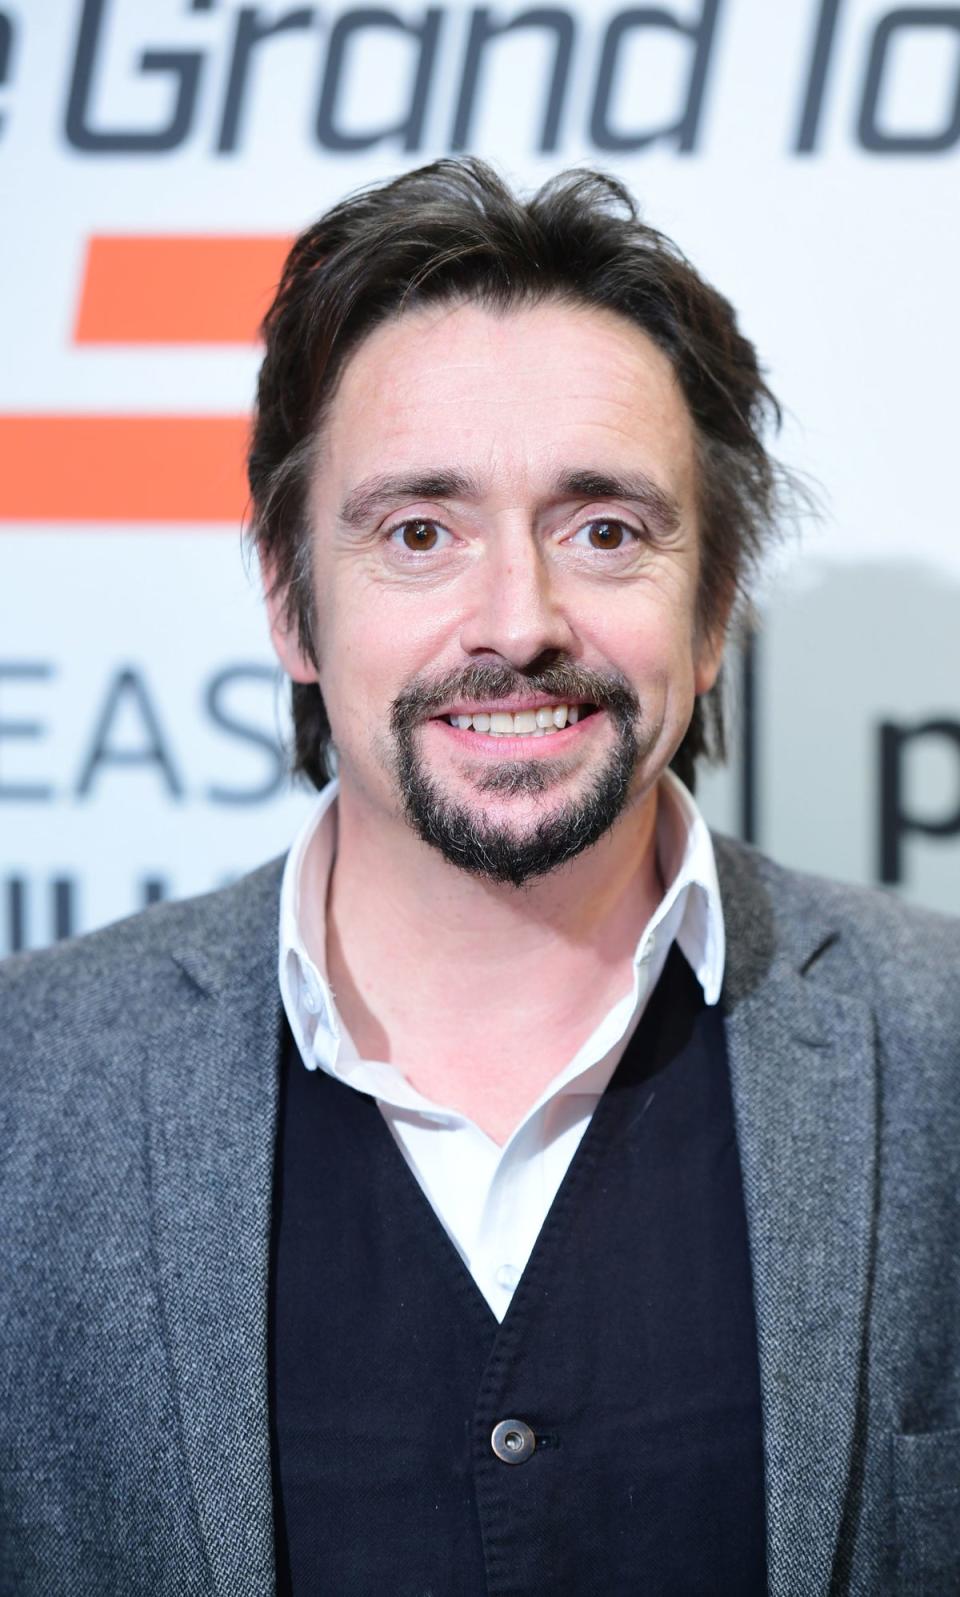 Richard Hammond has been involved in a number of high-speed crashes over the years (PA)